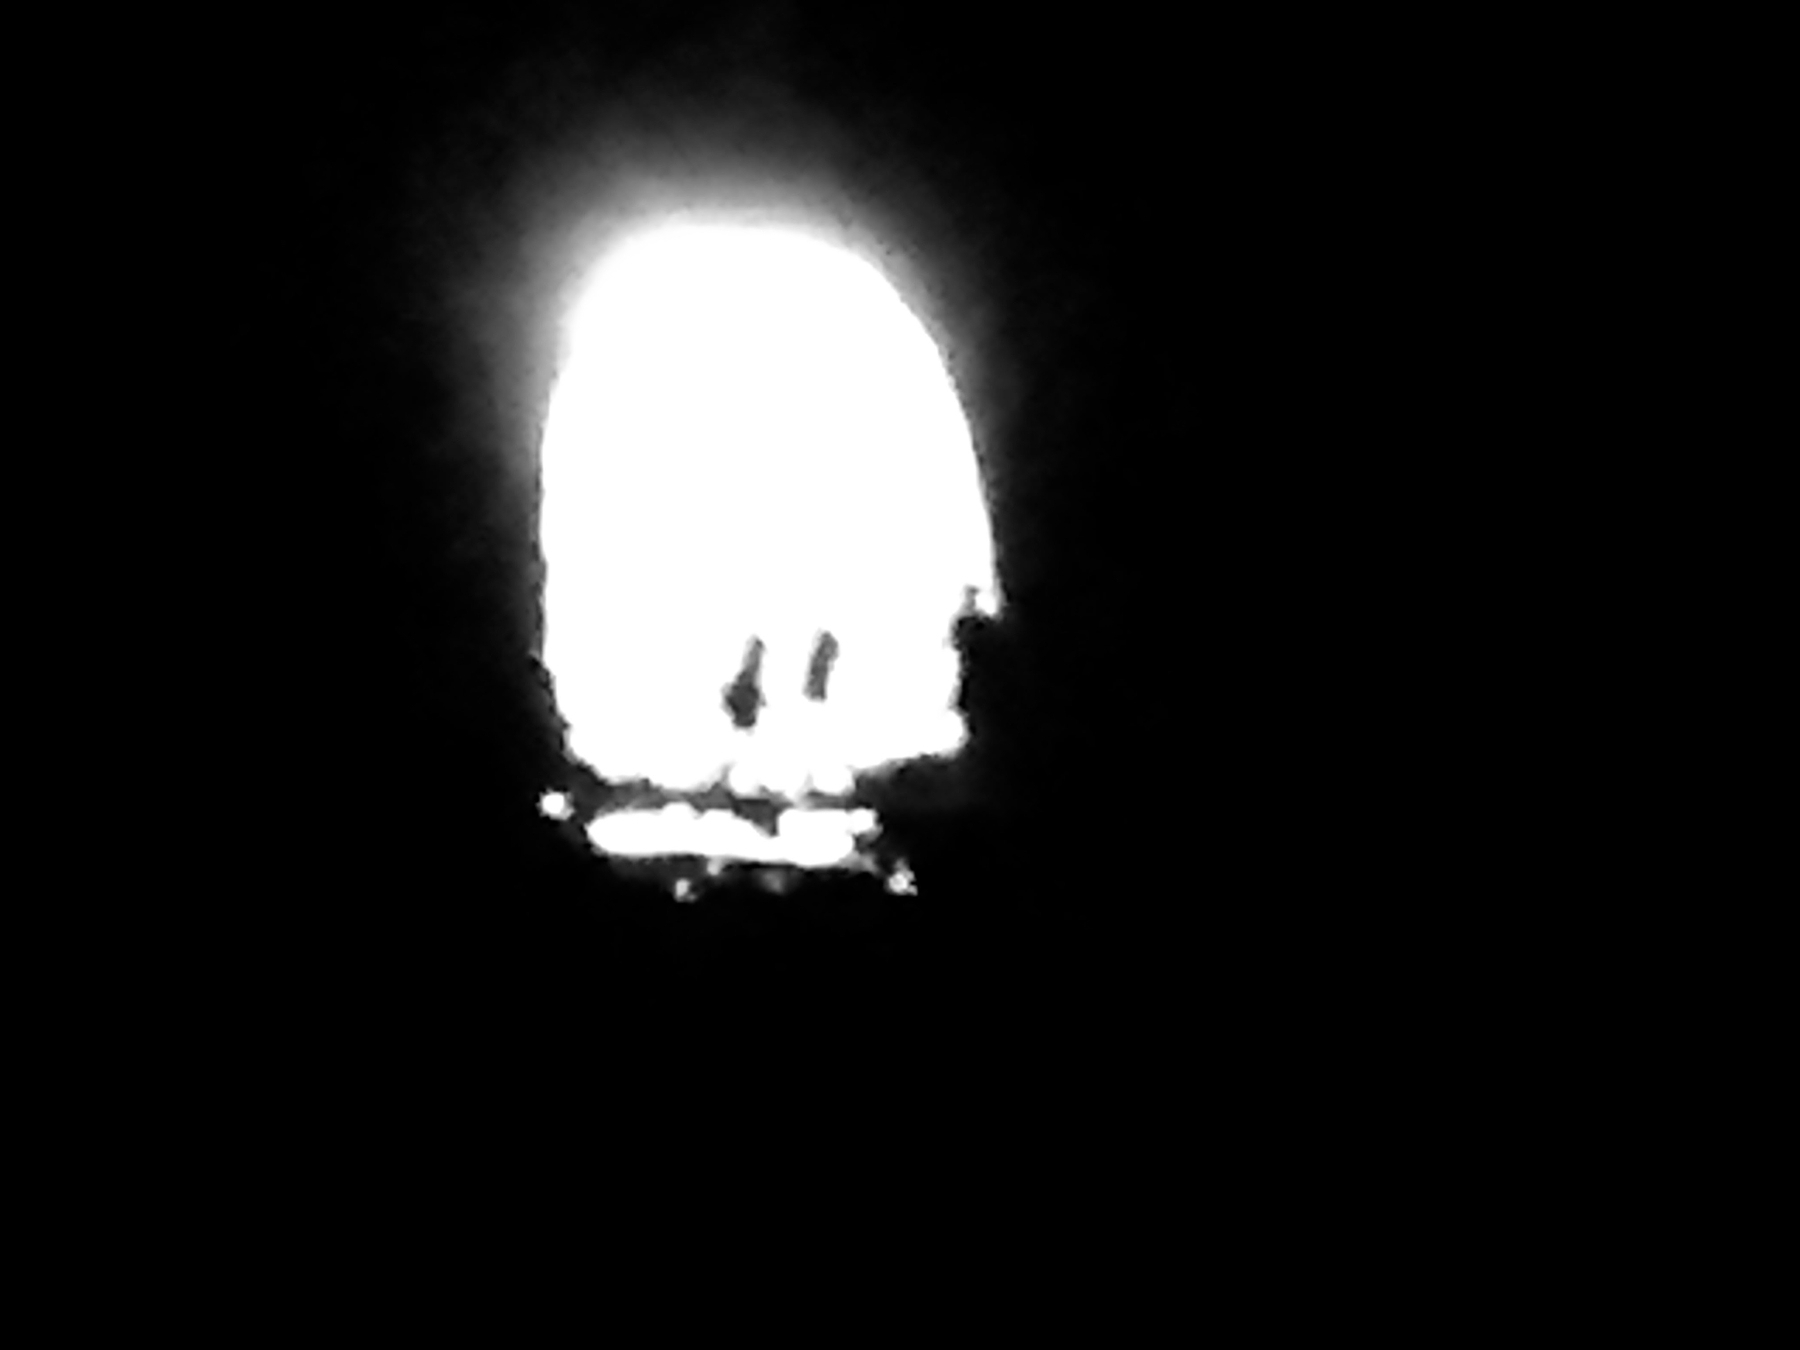 A low-resolution, high contrast photo of the light at the end of a disused rail tunnel. At the entrance, two or three figures are barely visible.